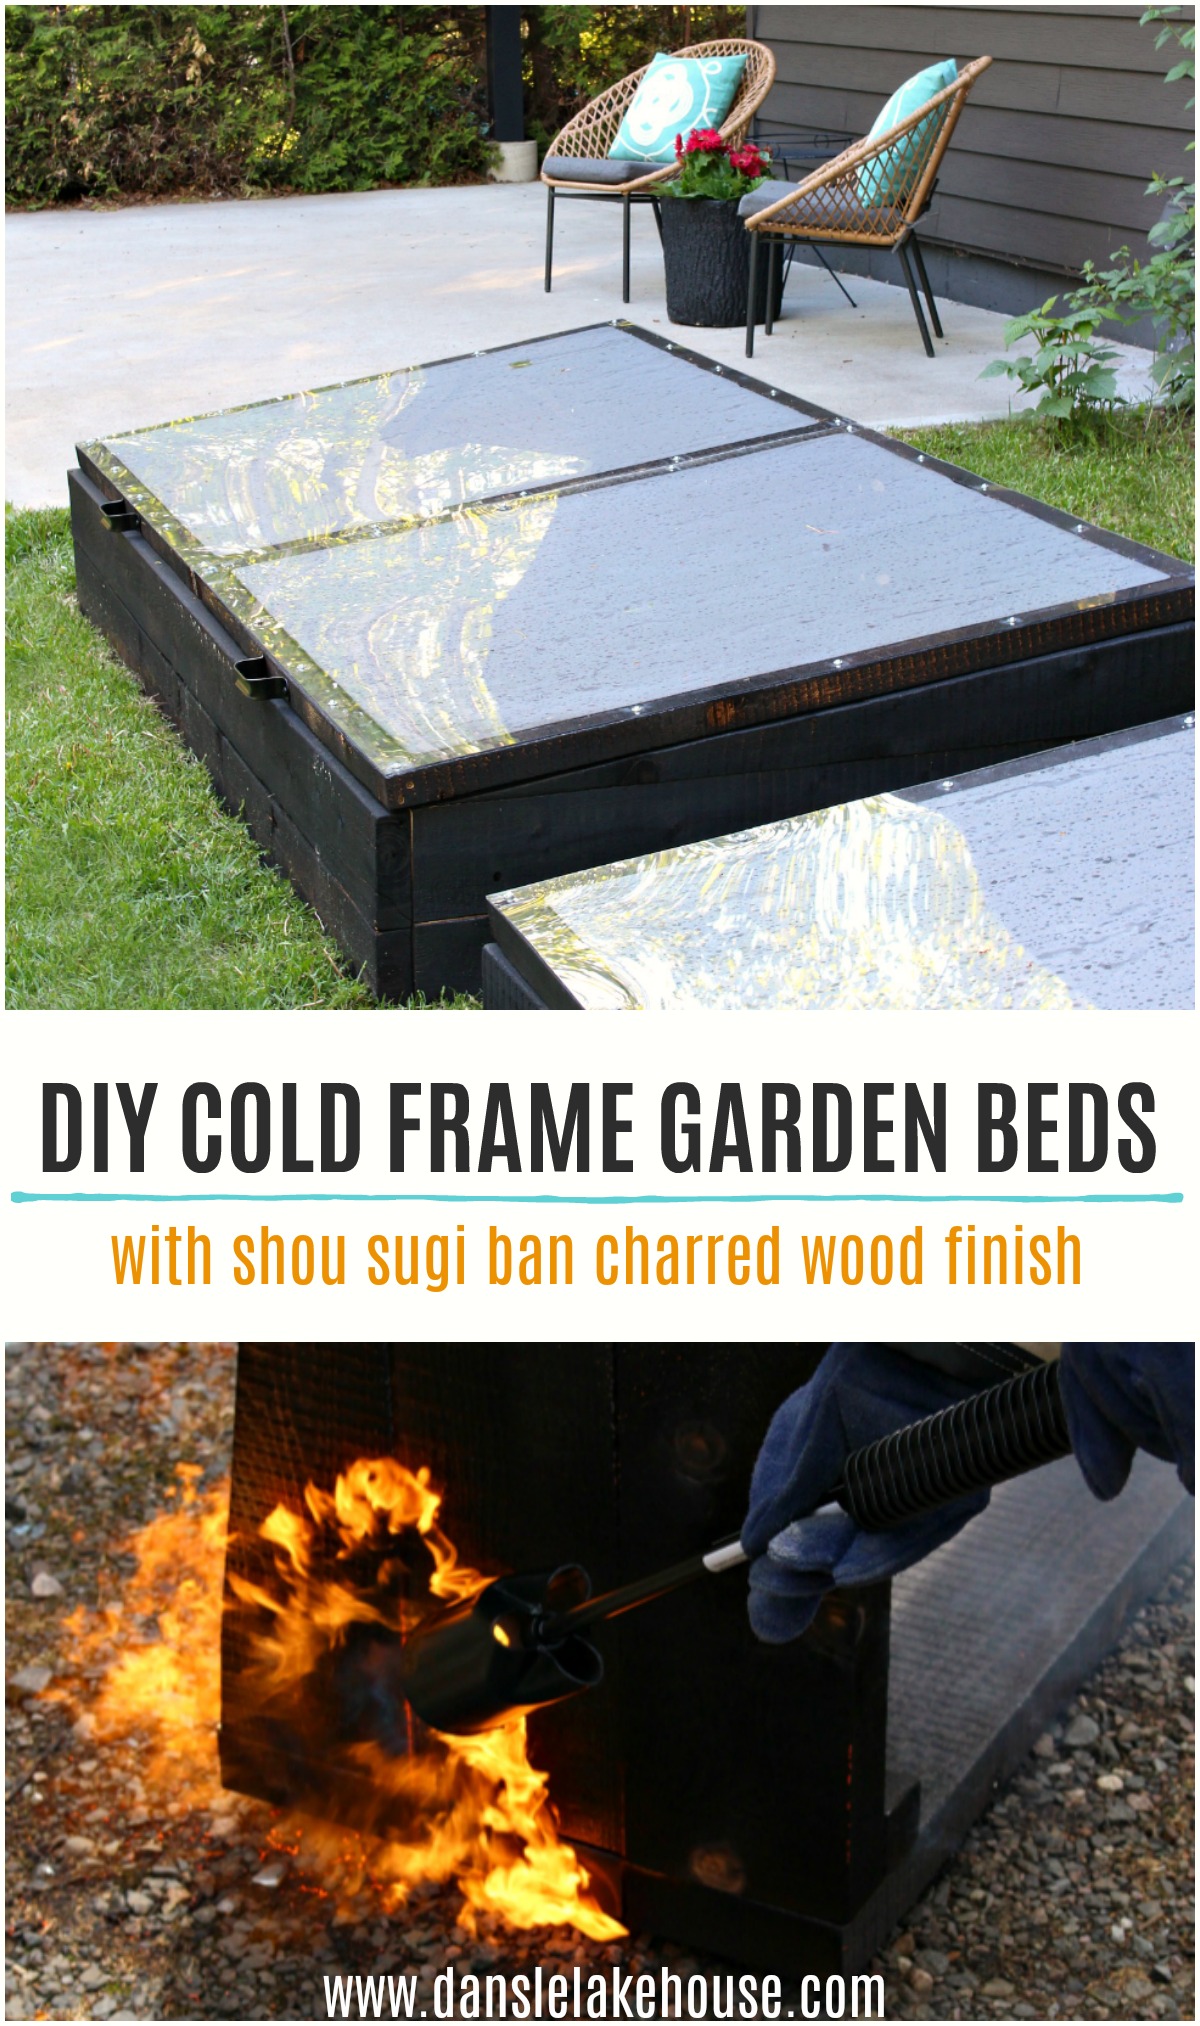 DIY Cold Frame Garden Beds with Shou Sugi Ban Charred Wood Finish